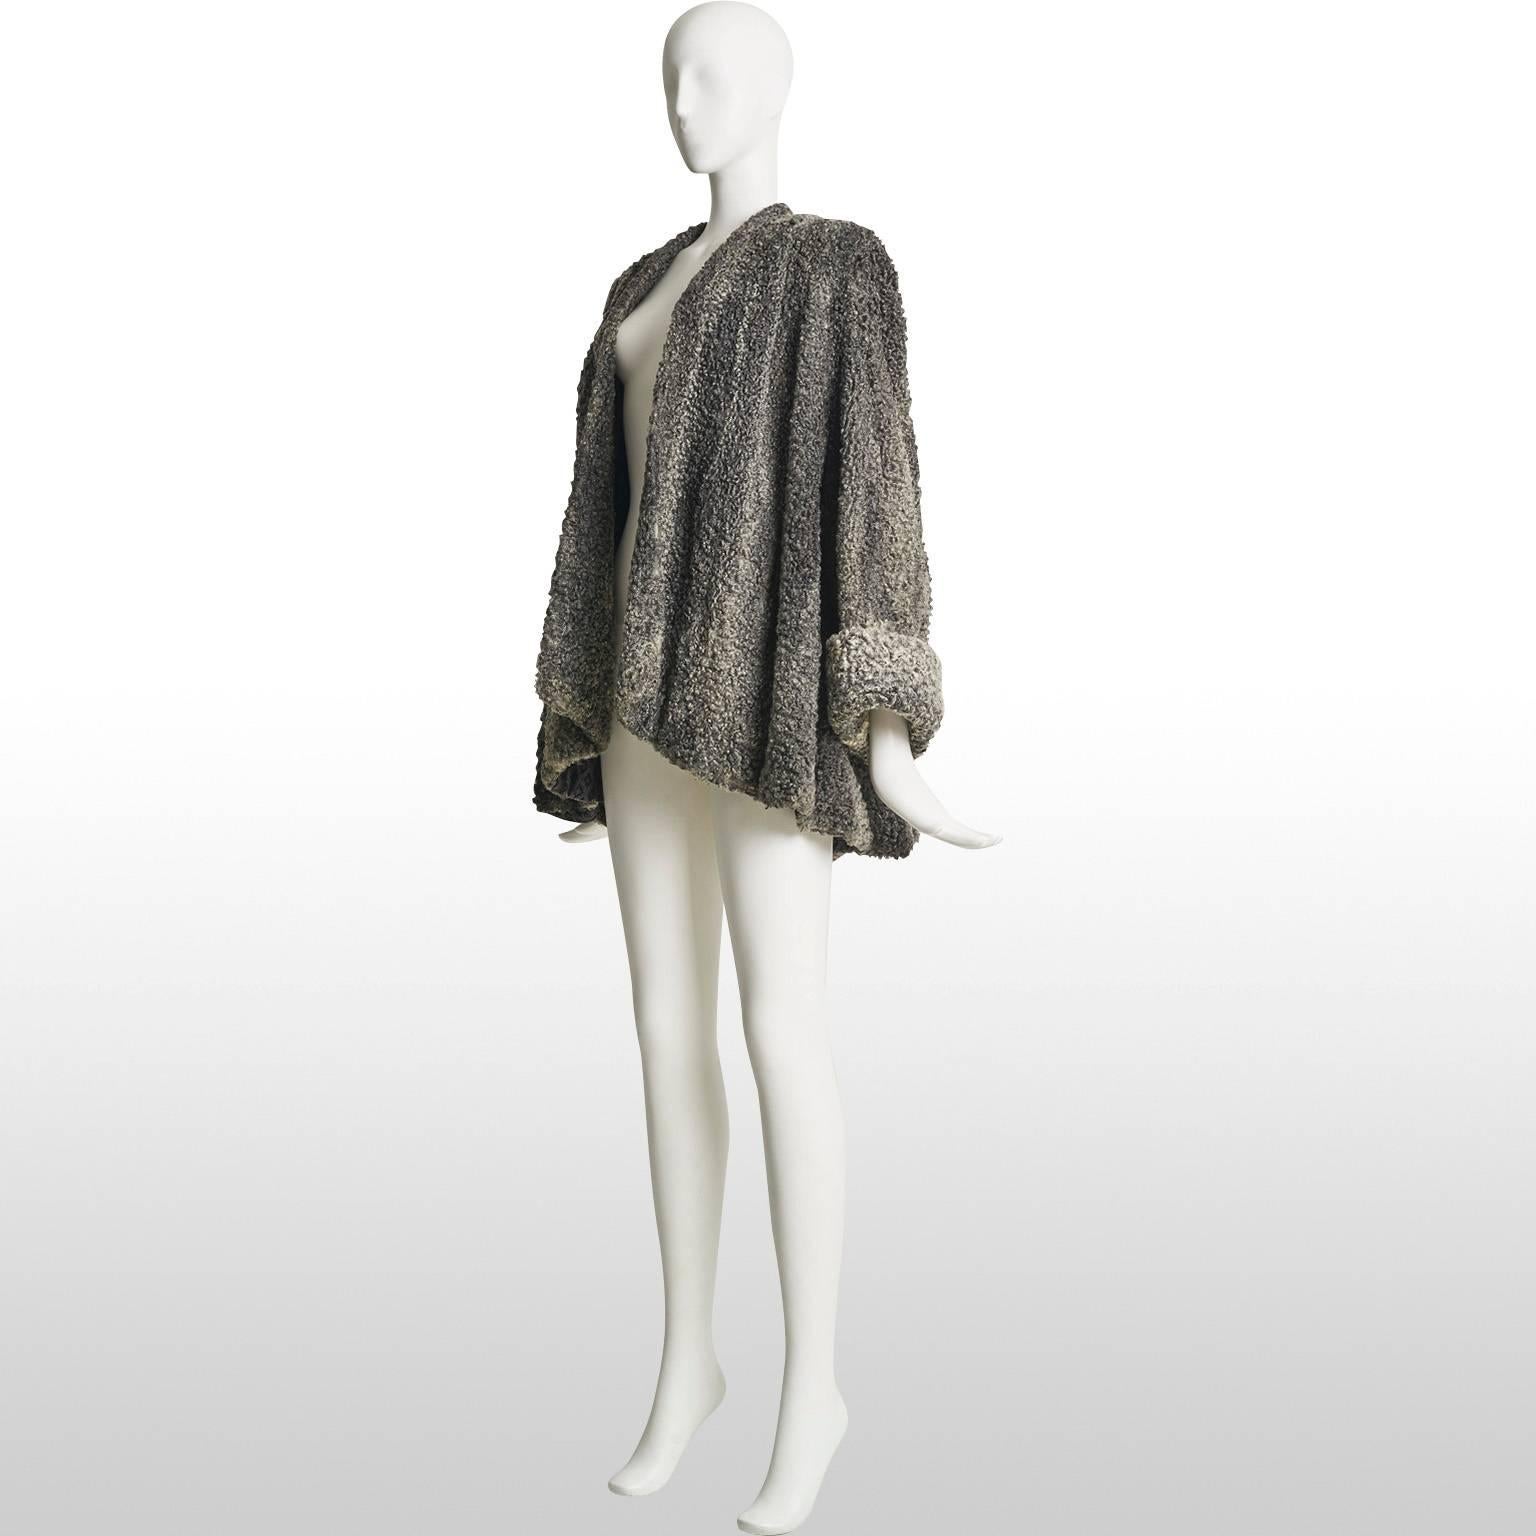 This is an amazing swing coat from the 40s, made out of astrakhan, which is a very high quality fur. The fur is optioned from very young Karakul lambs as only they have the black colour and soft, tightly wound coils of fur. Astrakhan has been used